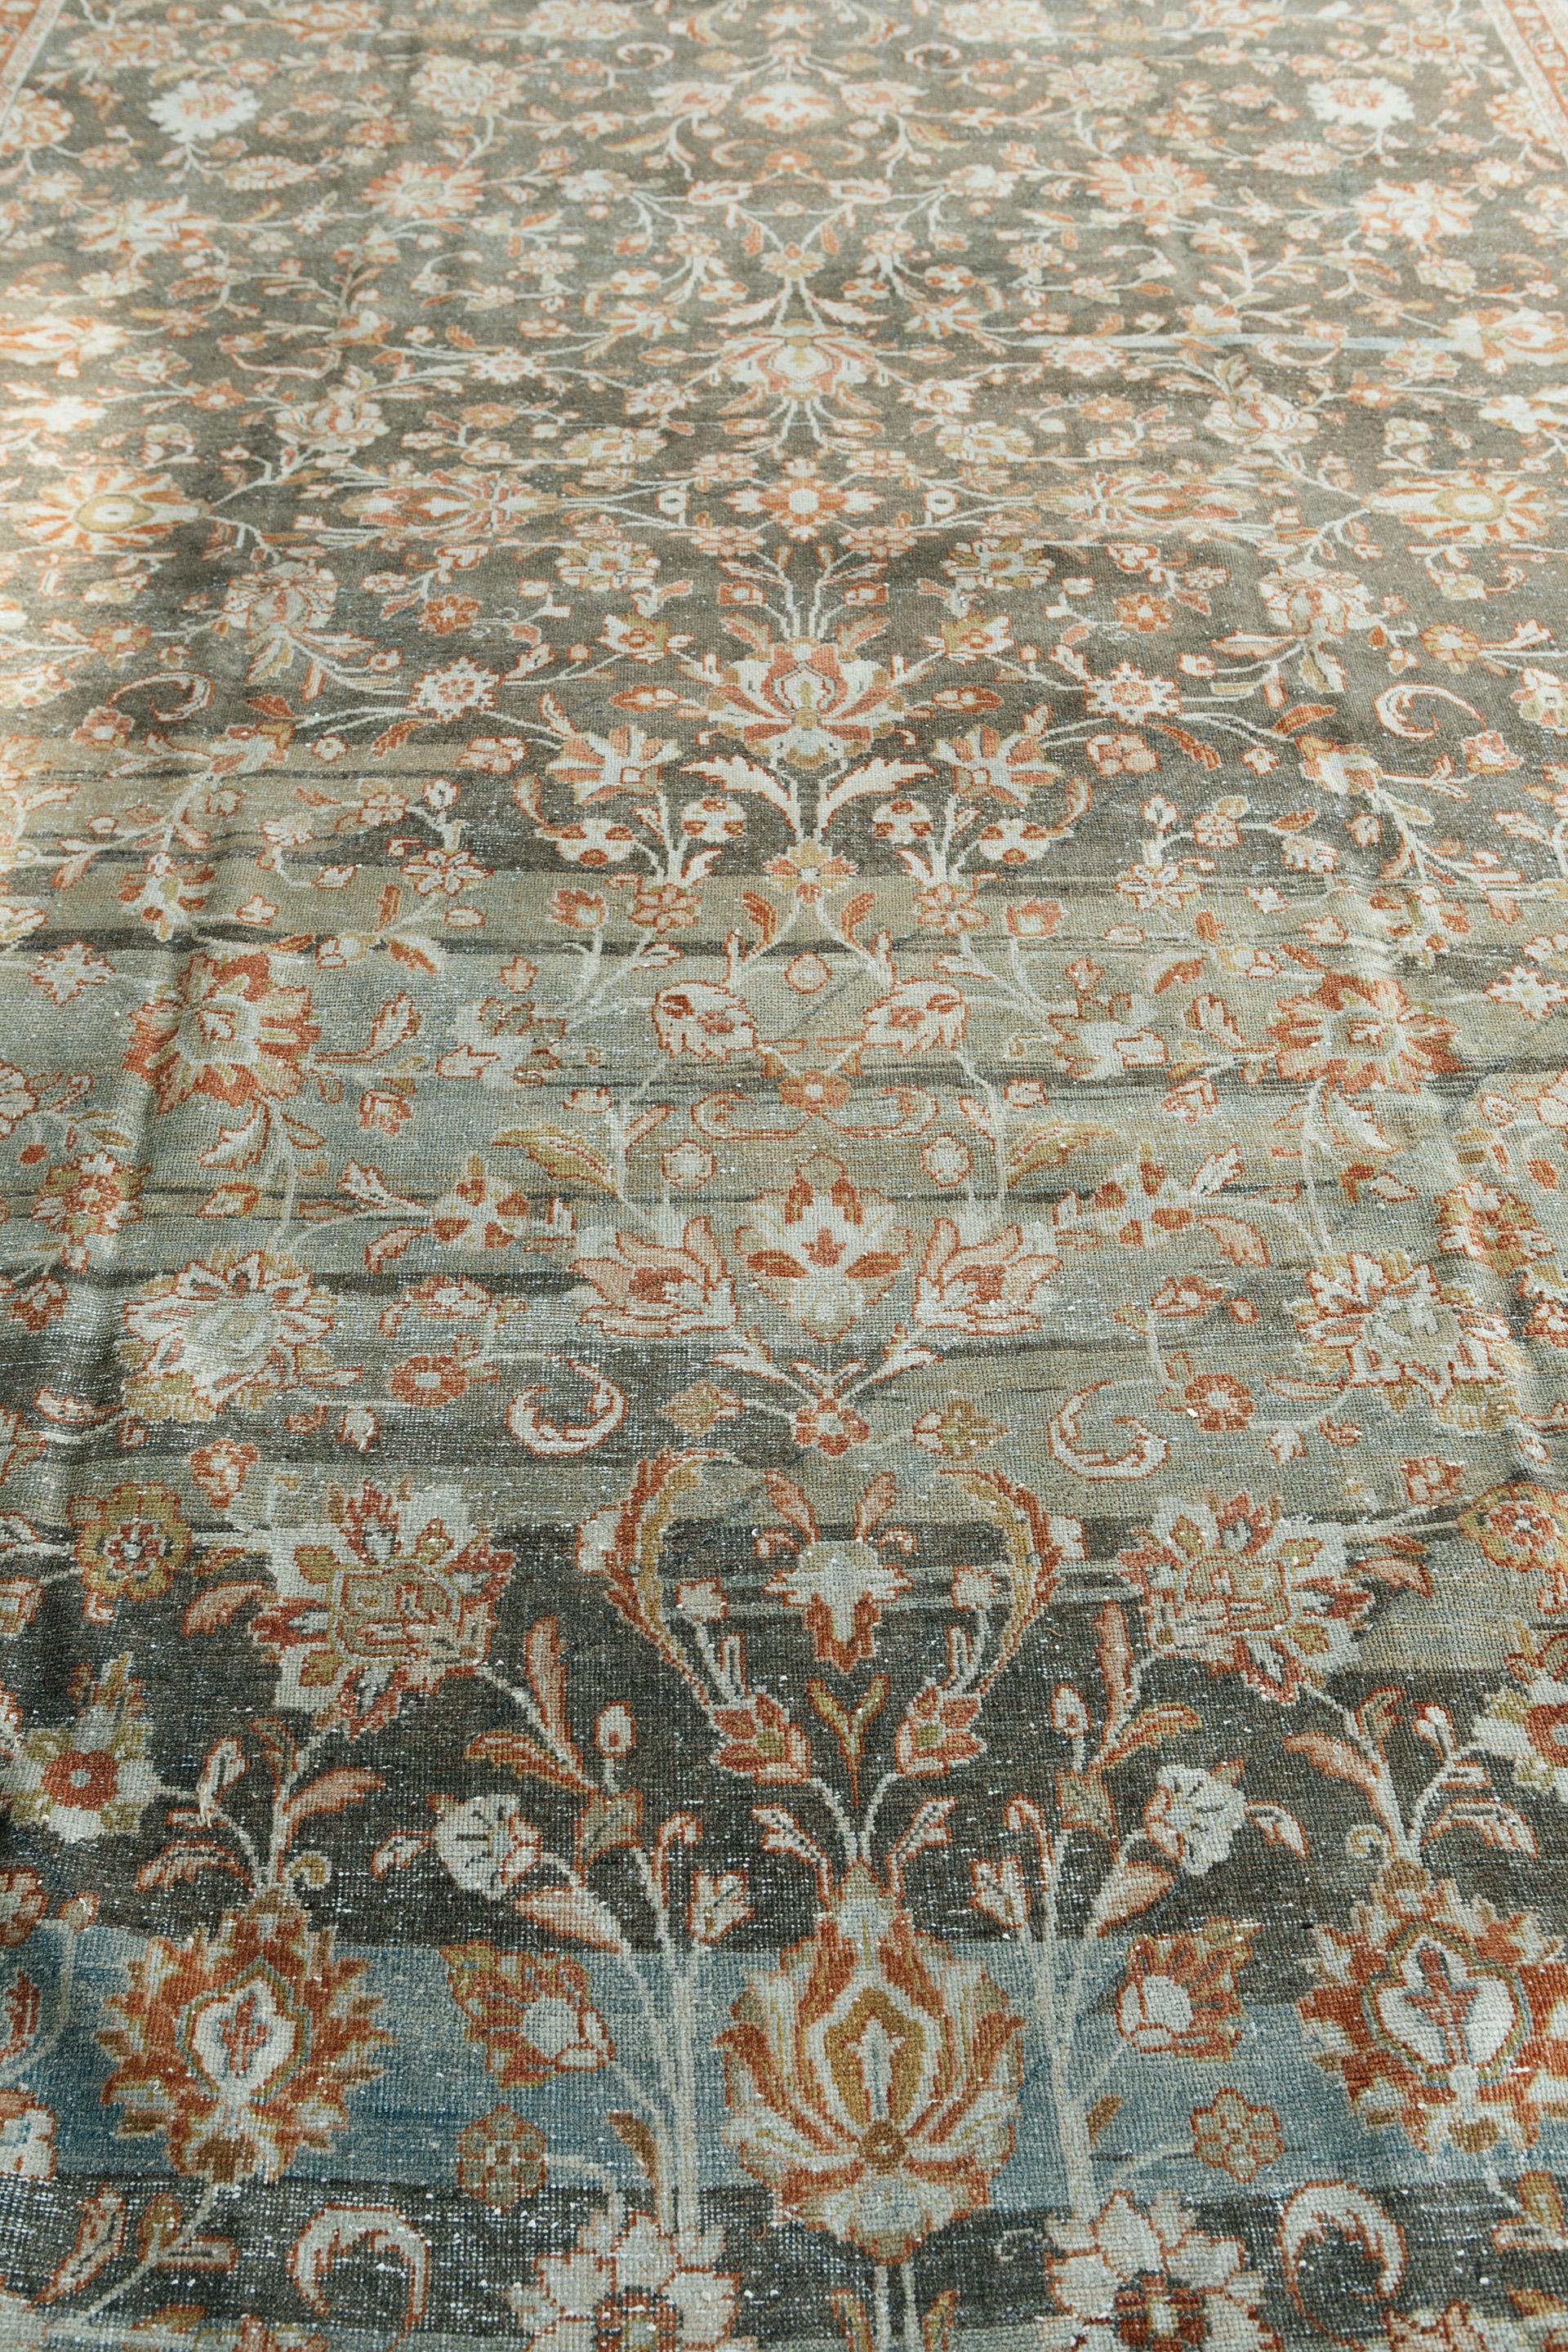 Exemplary Mahal antique carpets, such as this one, are preferred by many for their originality and inspired artistry. Therefore, rugs like this have forged an important niche in today’s decorative market for their compatibility and versatility with